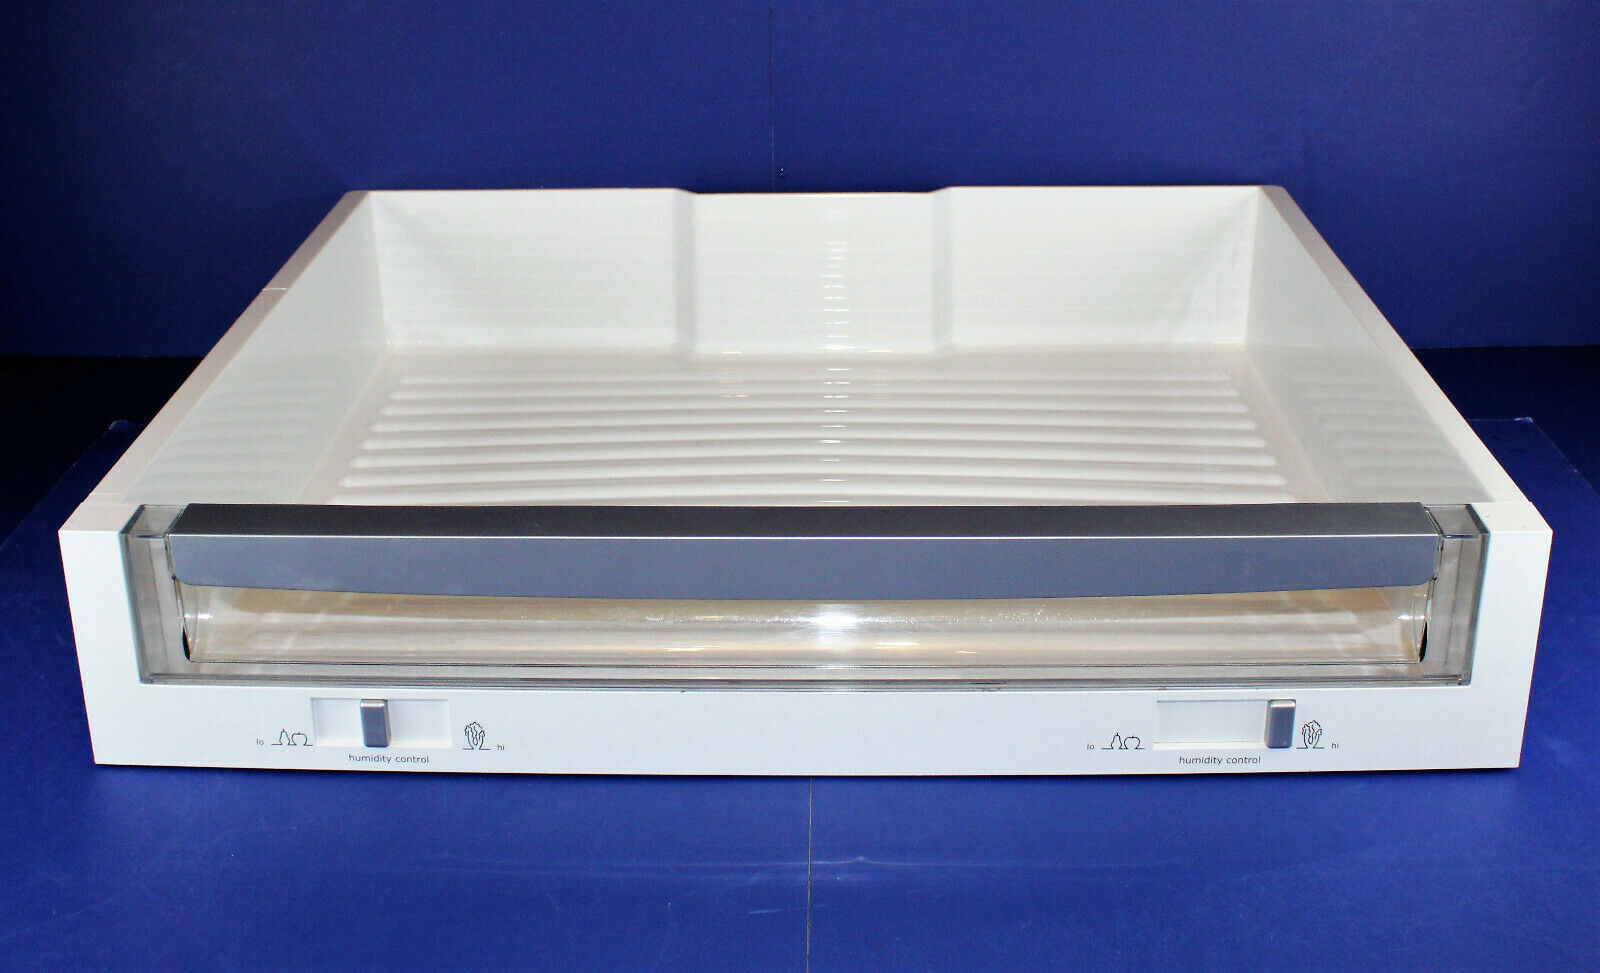 Primary image for Electrolux Refrigerator : Deli Pan Drawer (7241827204 / 241827208) {P4453}